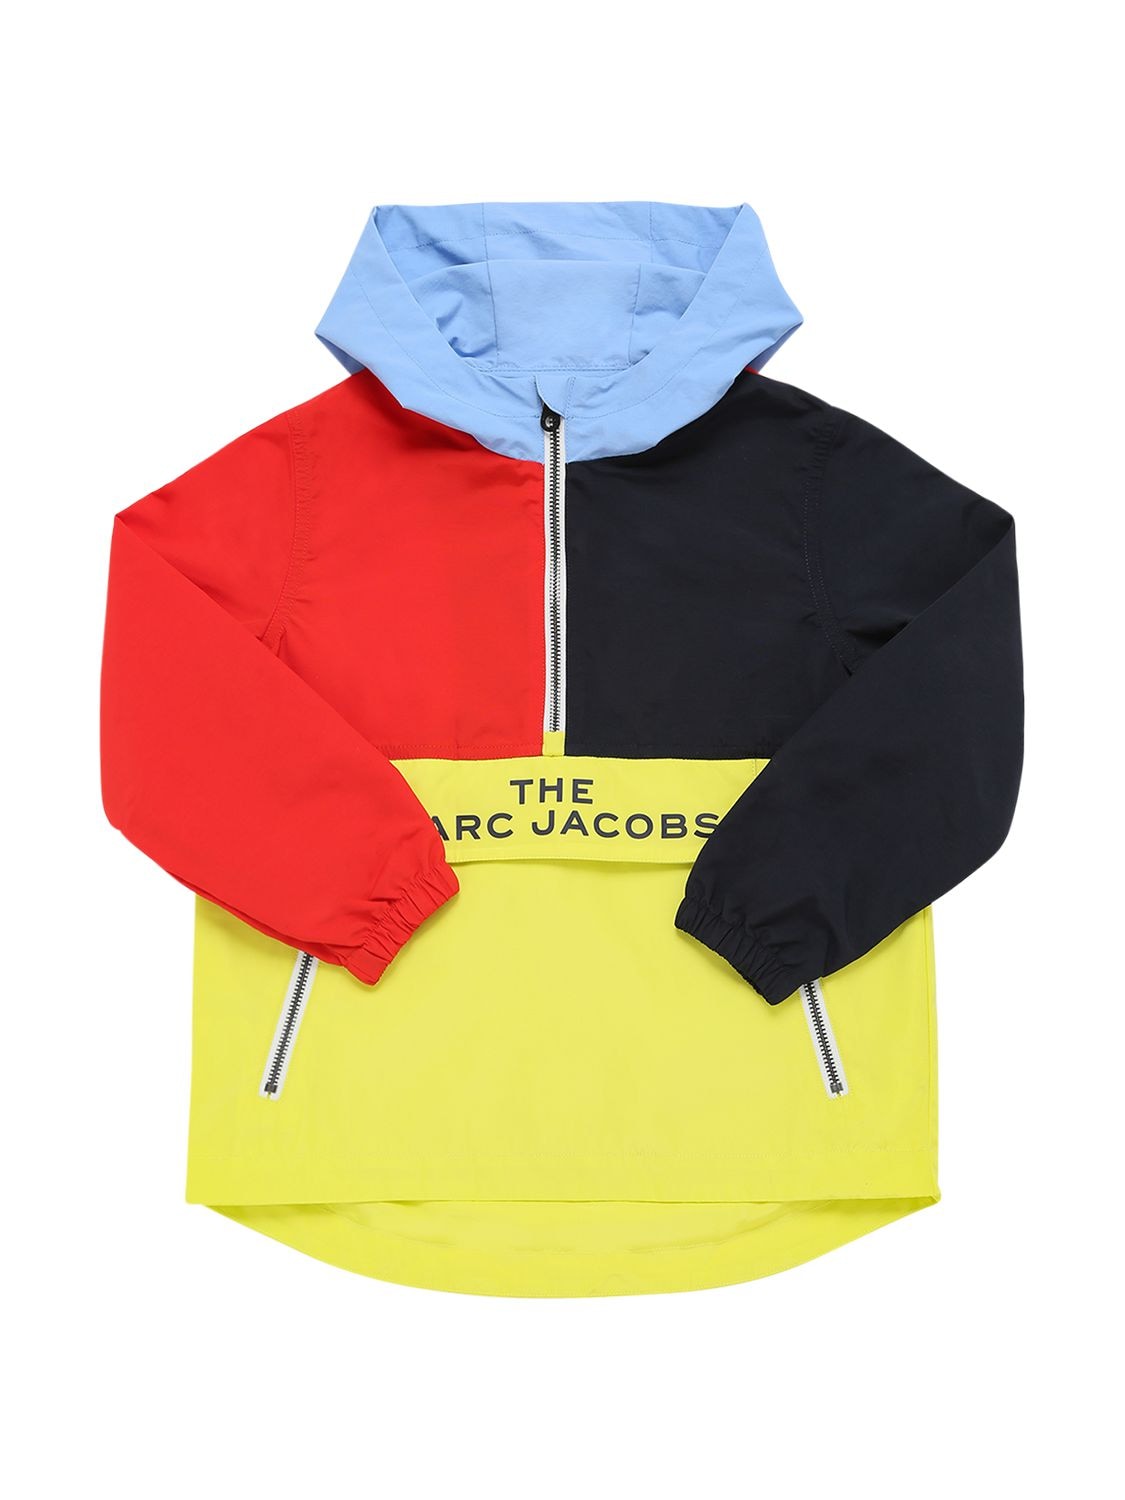 Marc Jacobs (the) Kids' Color Block Anorak W/ Logo In 멀티컬러 | ModeSens